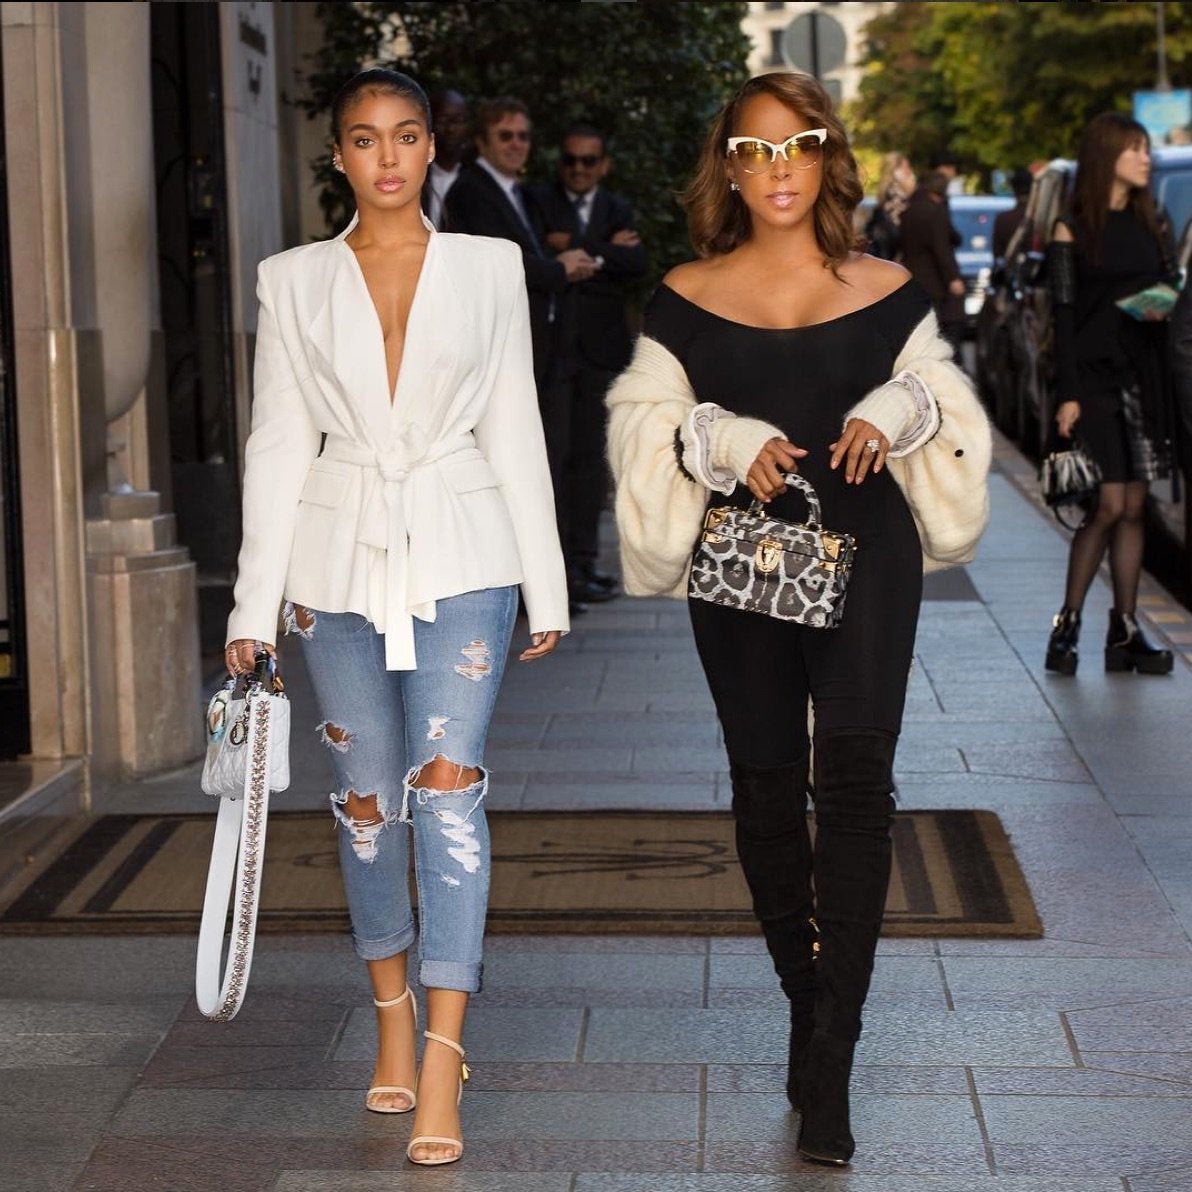 Marjorie and Lori Harvey May Be The Chicest Mother-Daughter Duo—Here's Proof!
